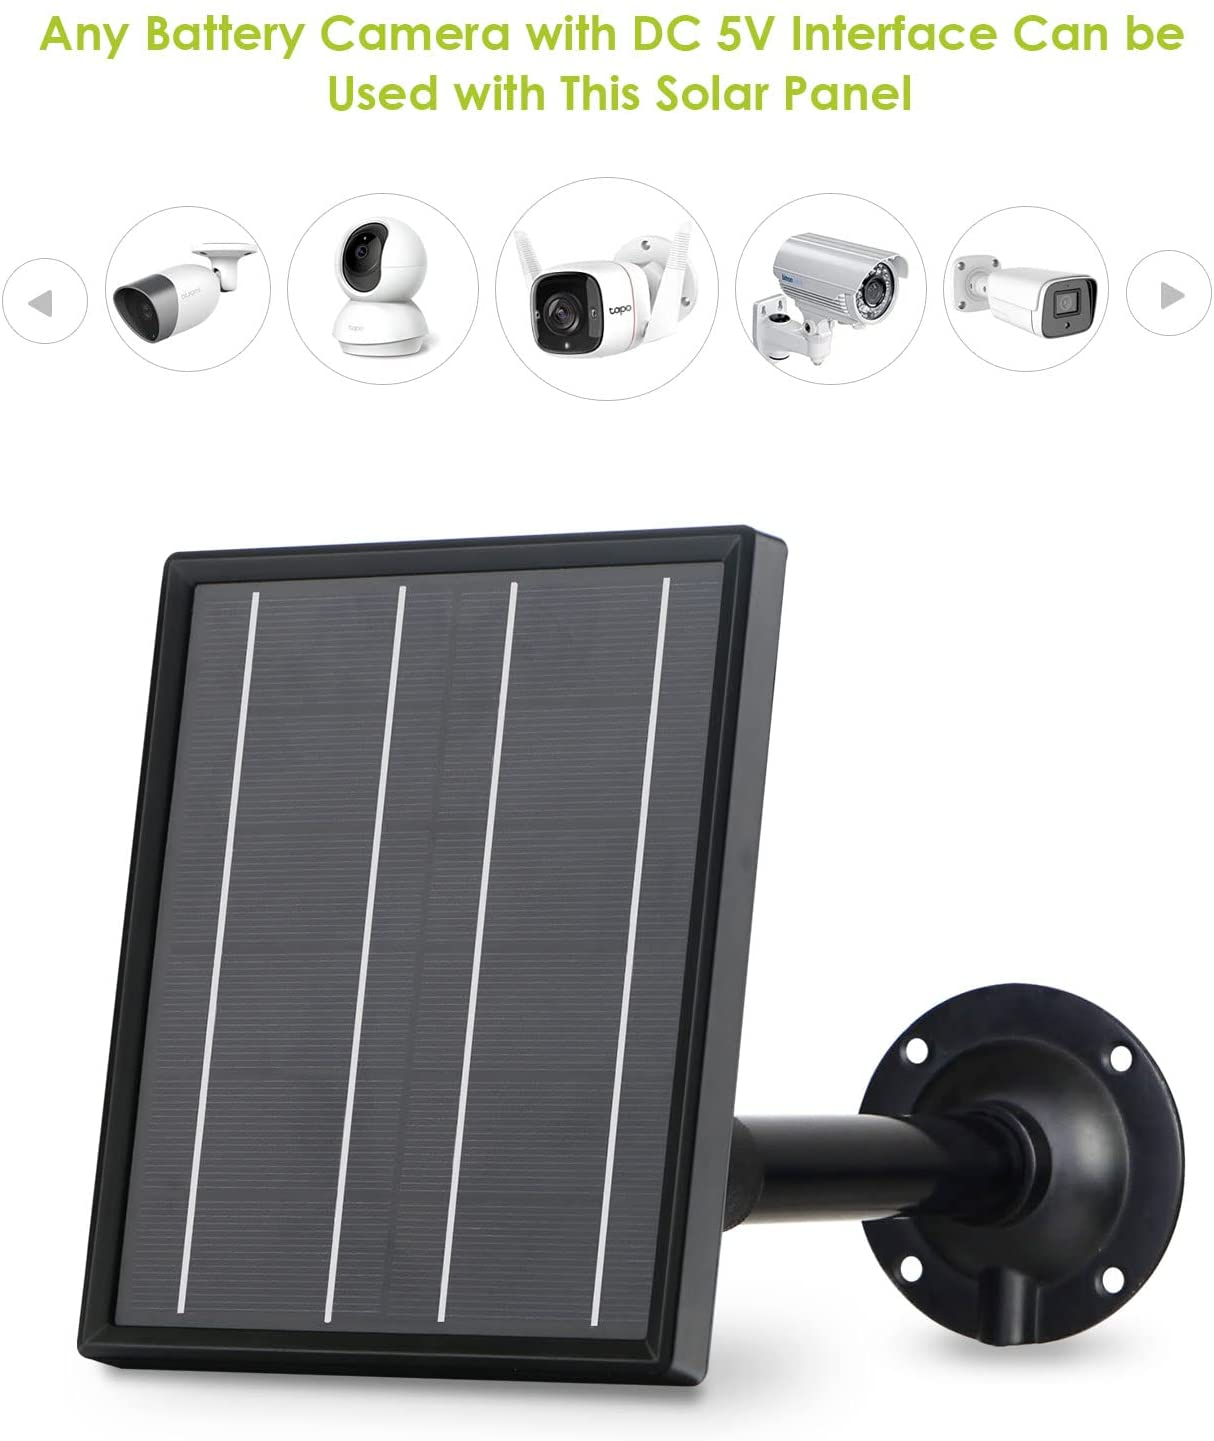 ALLPOWERS 5V 3.5W Solar Panel Kit for Outdoor Security Camera